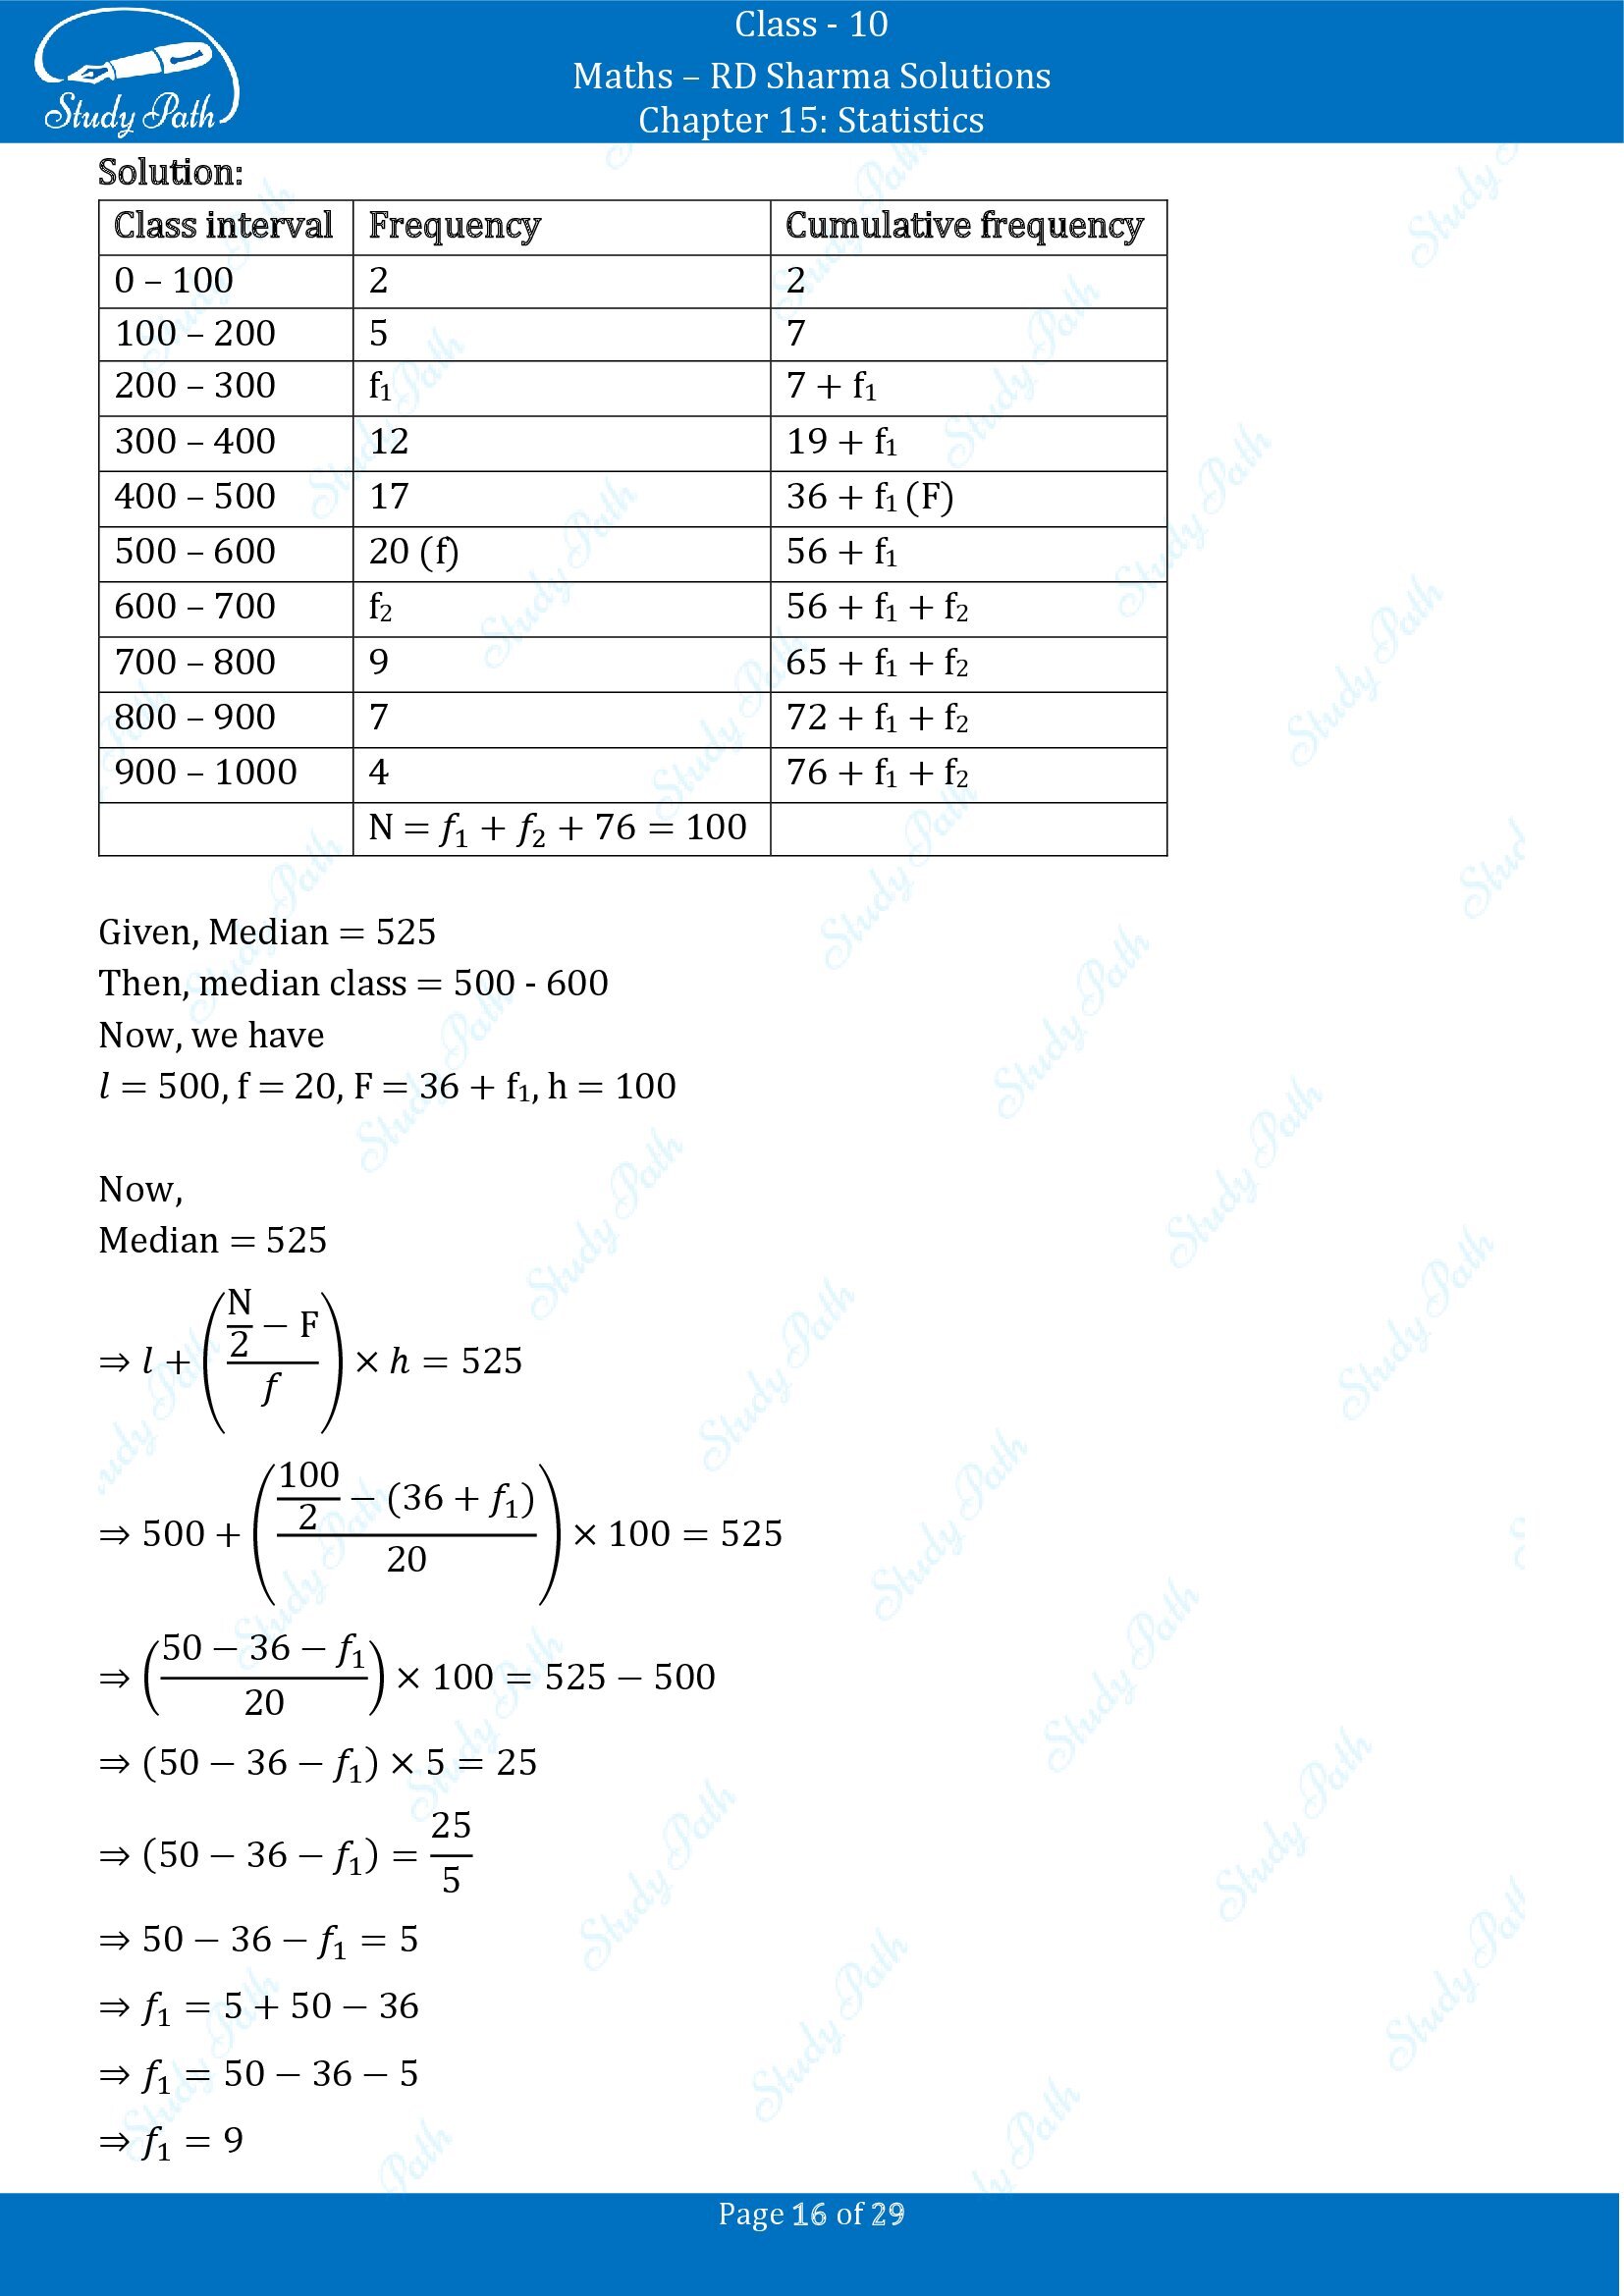 RD Sharma Solutions Class 10 Chapter 15 Statistics Exercise 15.4 00016